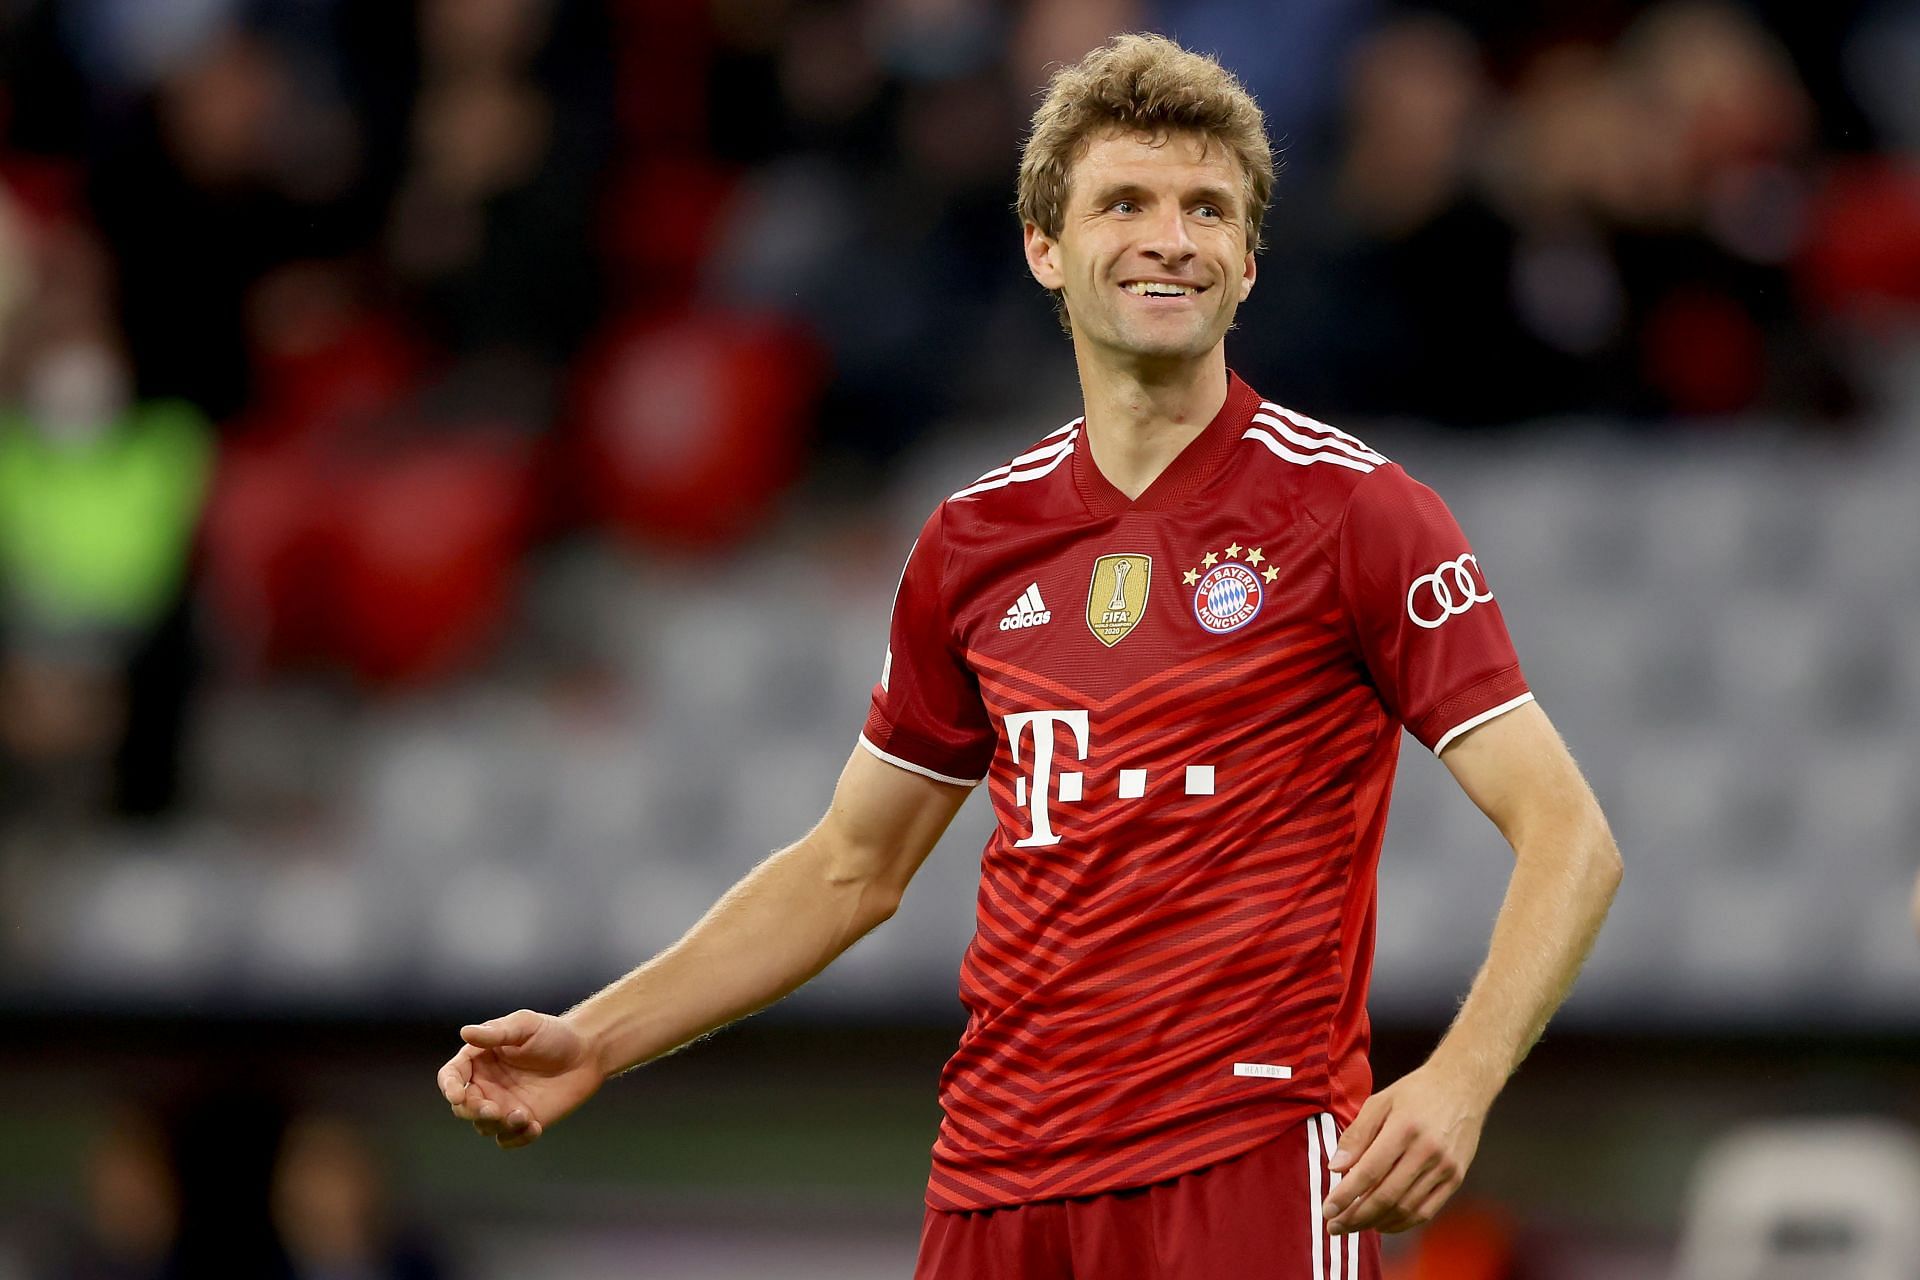 Thomas Muller has been stupendous for Bayern Munich this season.